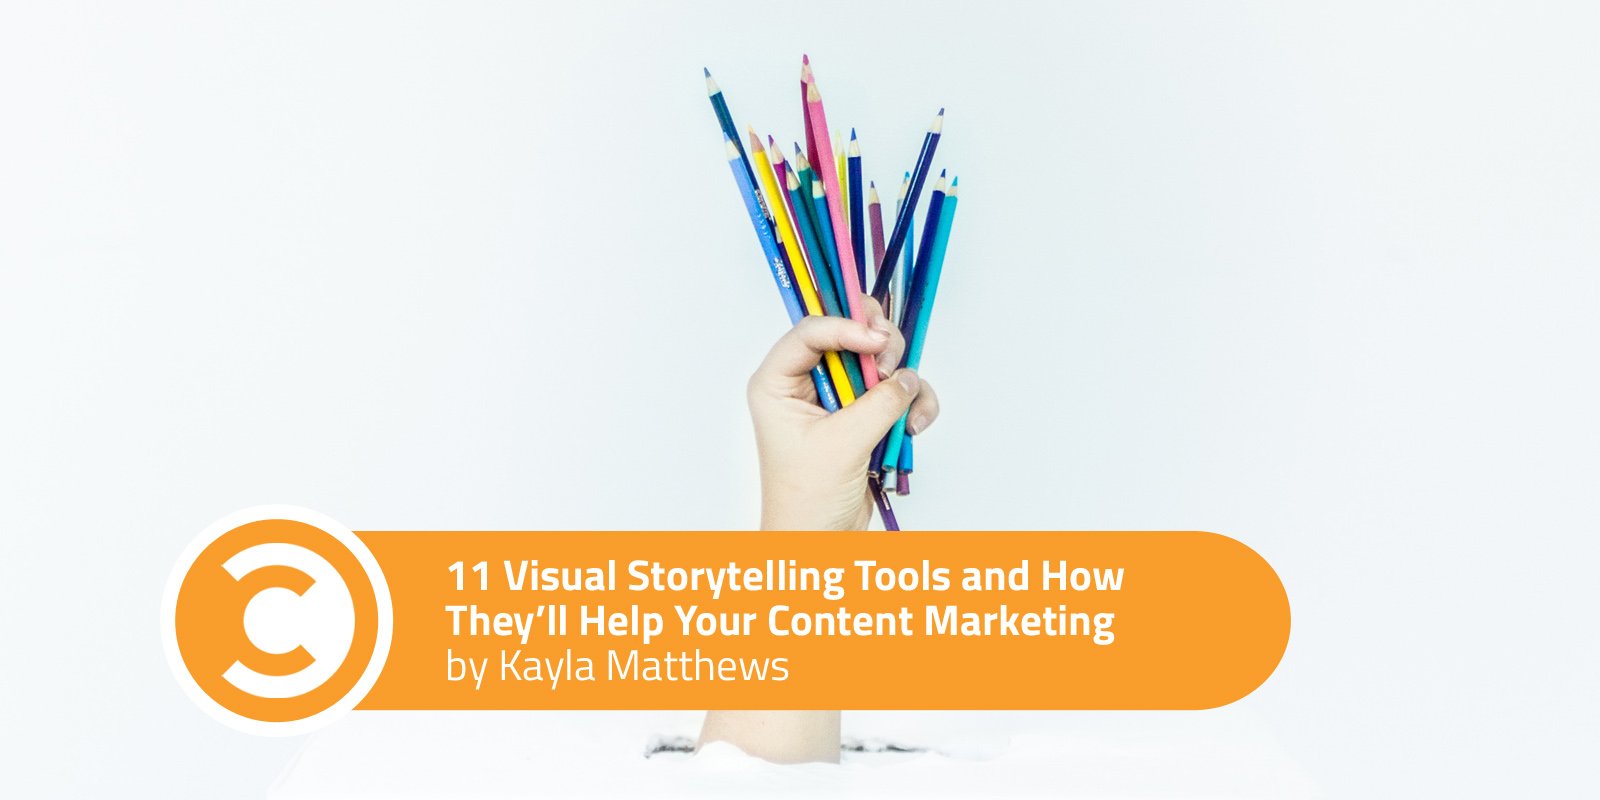 11 Visual Storytelling Tools and How They'll Help Your Content Marketing